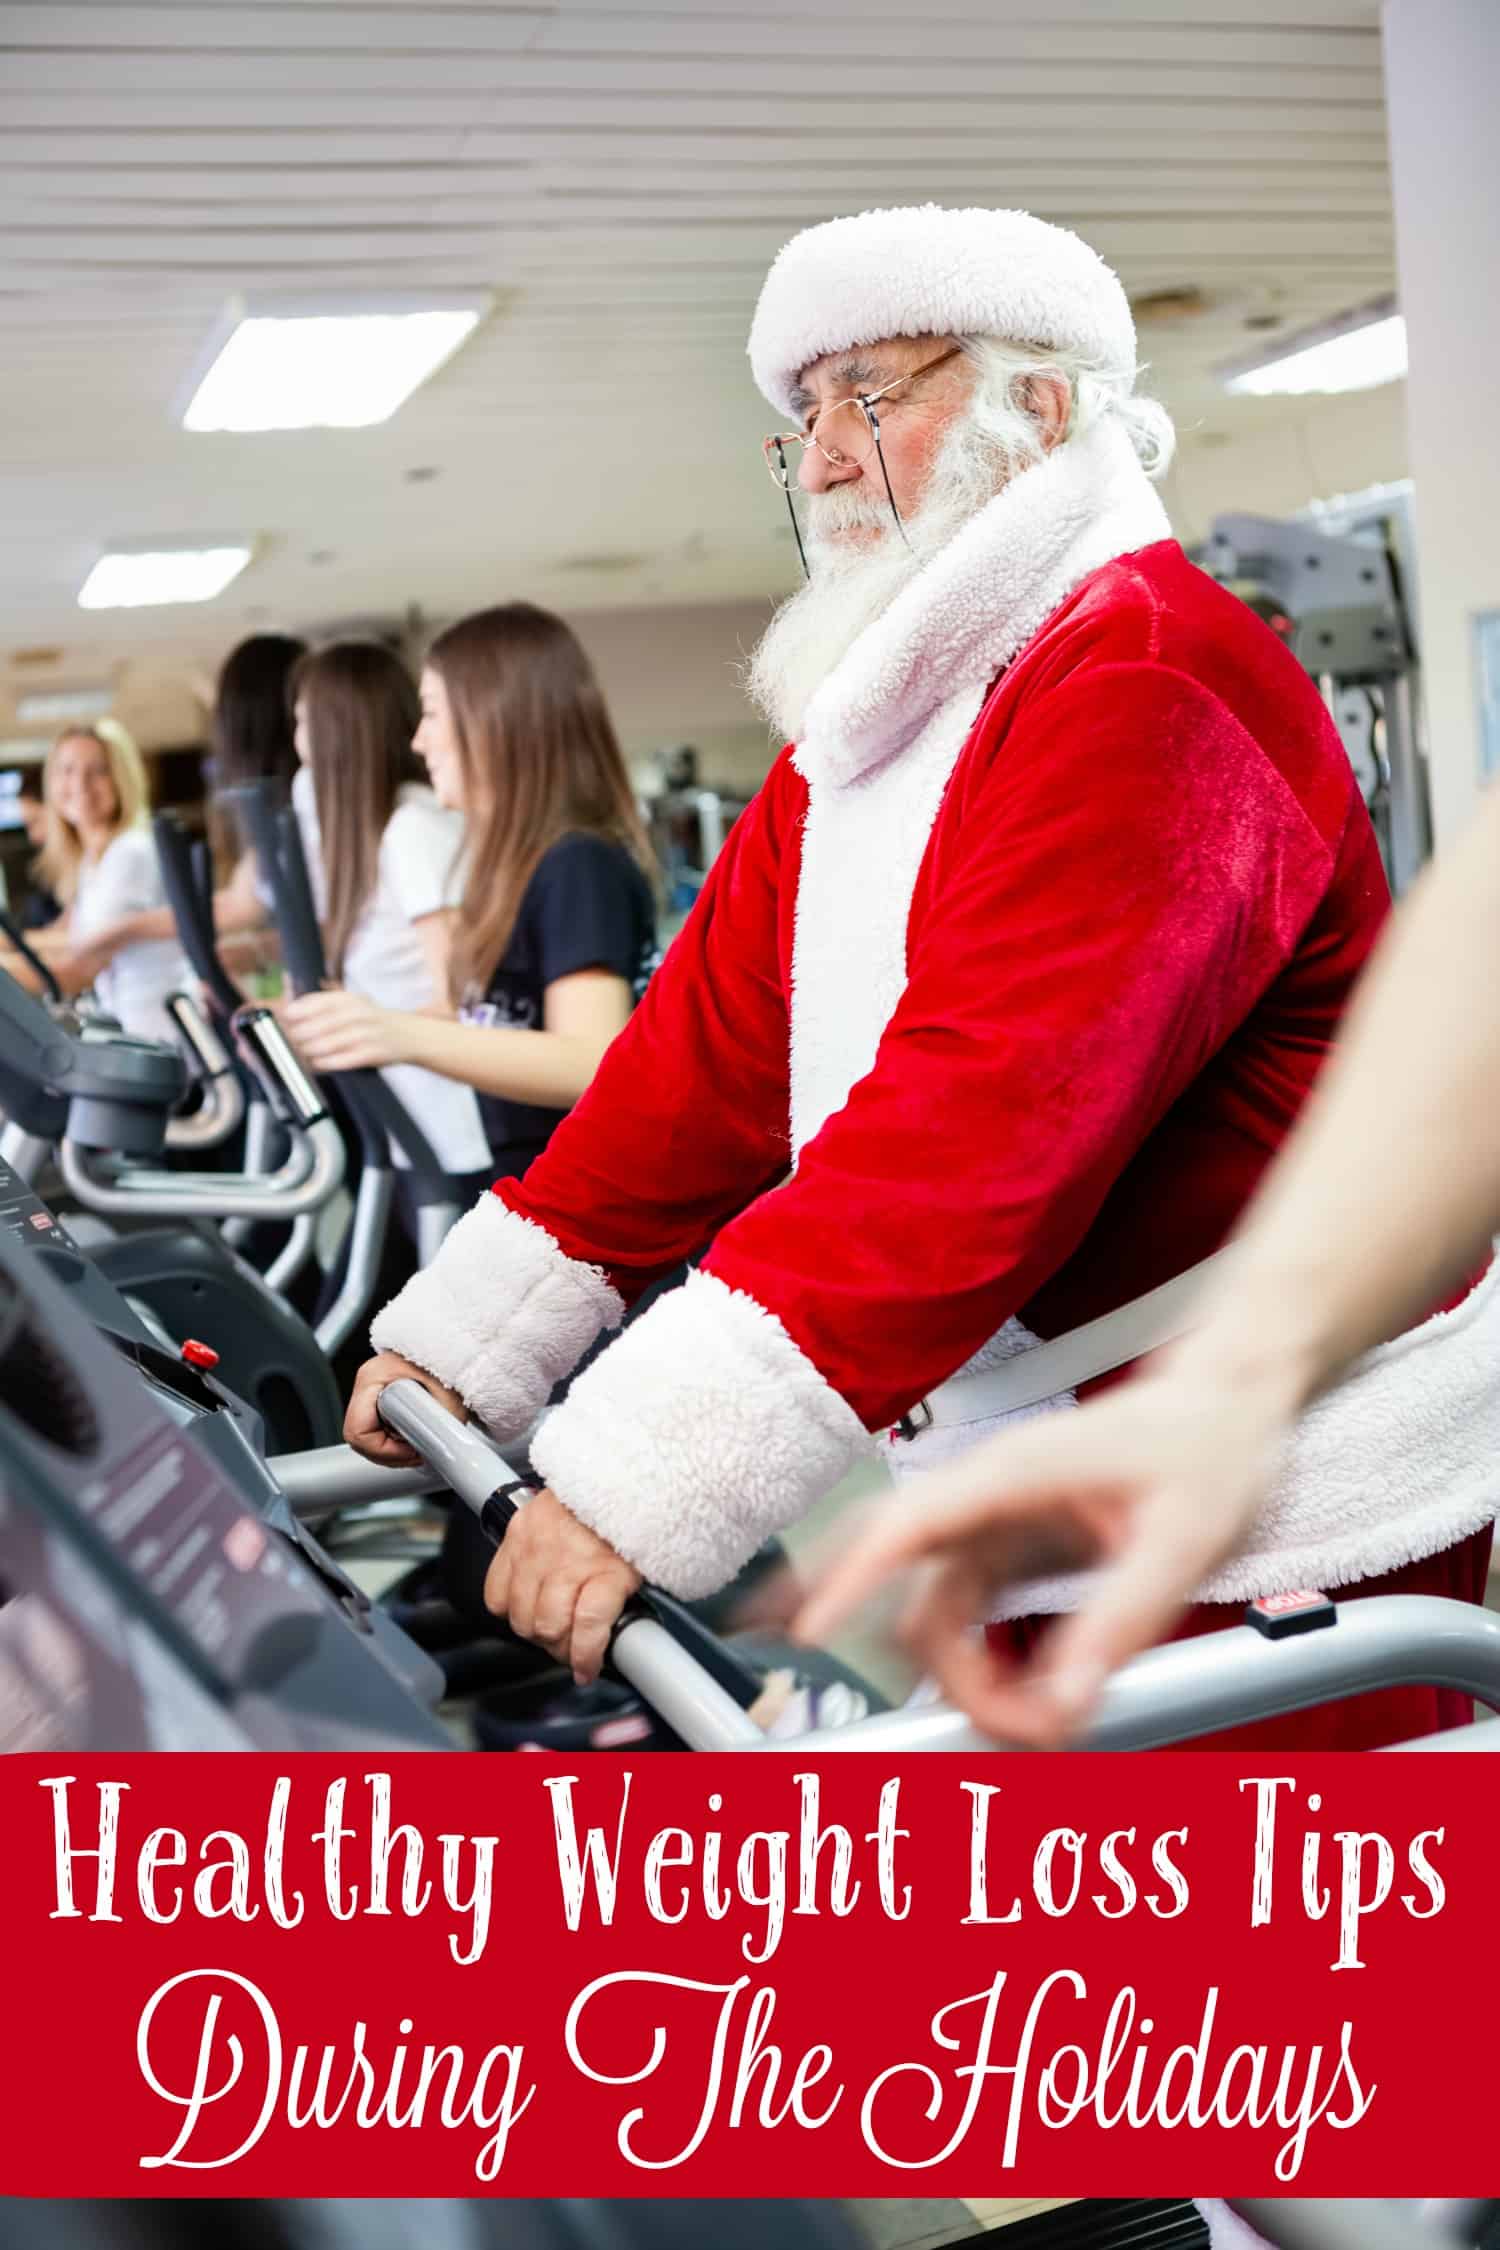 Santa Claus workout on a treadmill at gym